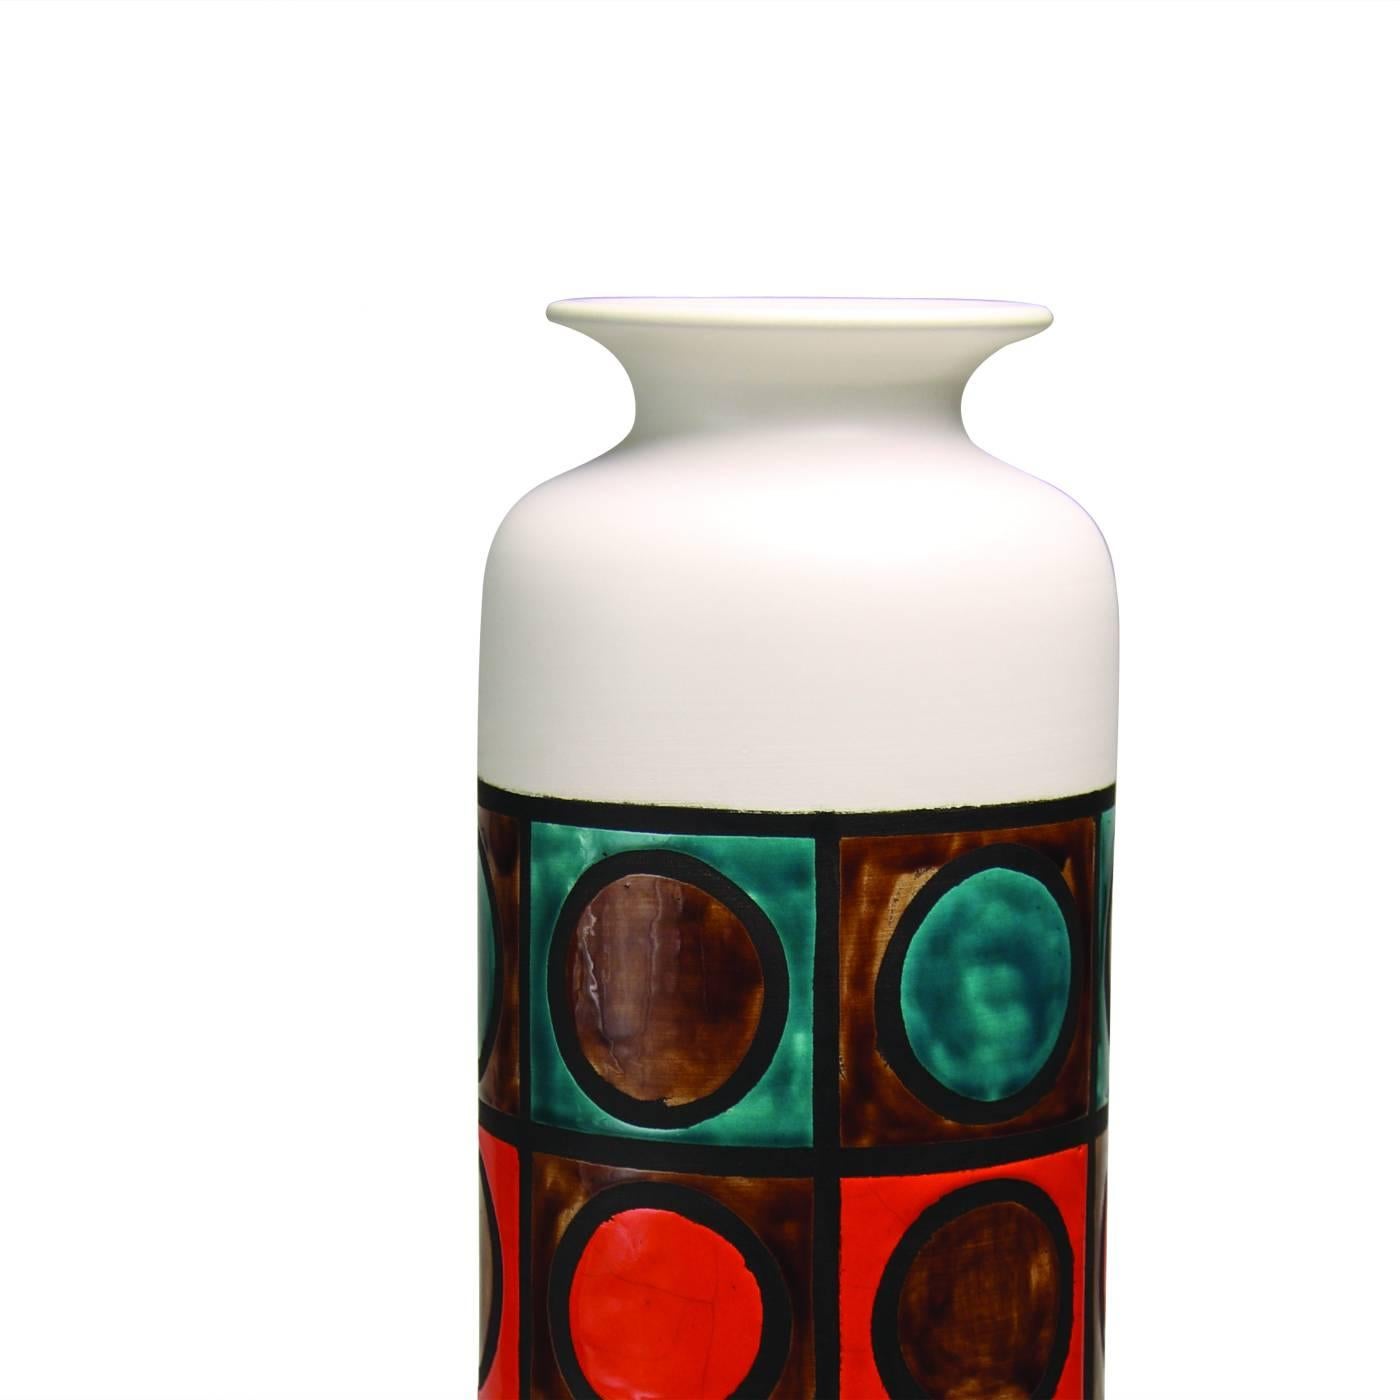 This striking vase in white clay has a simple cylindrical shape with a white finish, and a central area decorated with a series of multicolored rings enclosed in squares each marked with a dark edge. This piece, designed by Aldo Londi in 1963, is